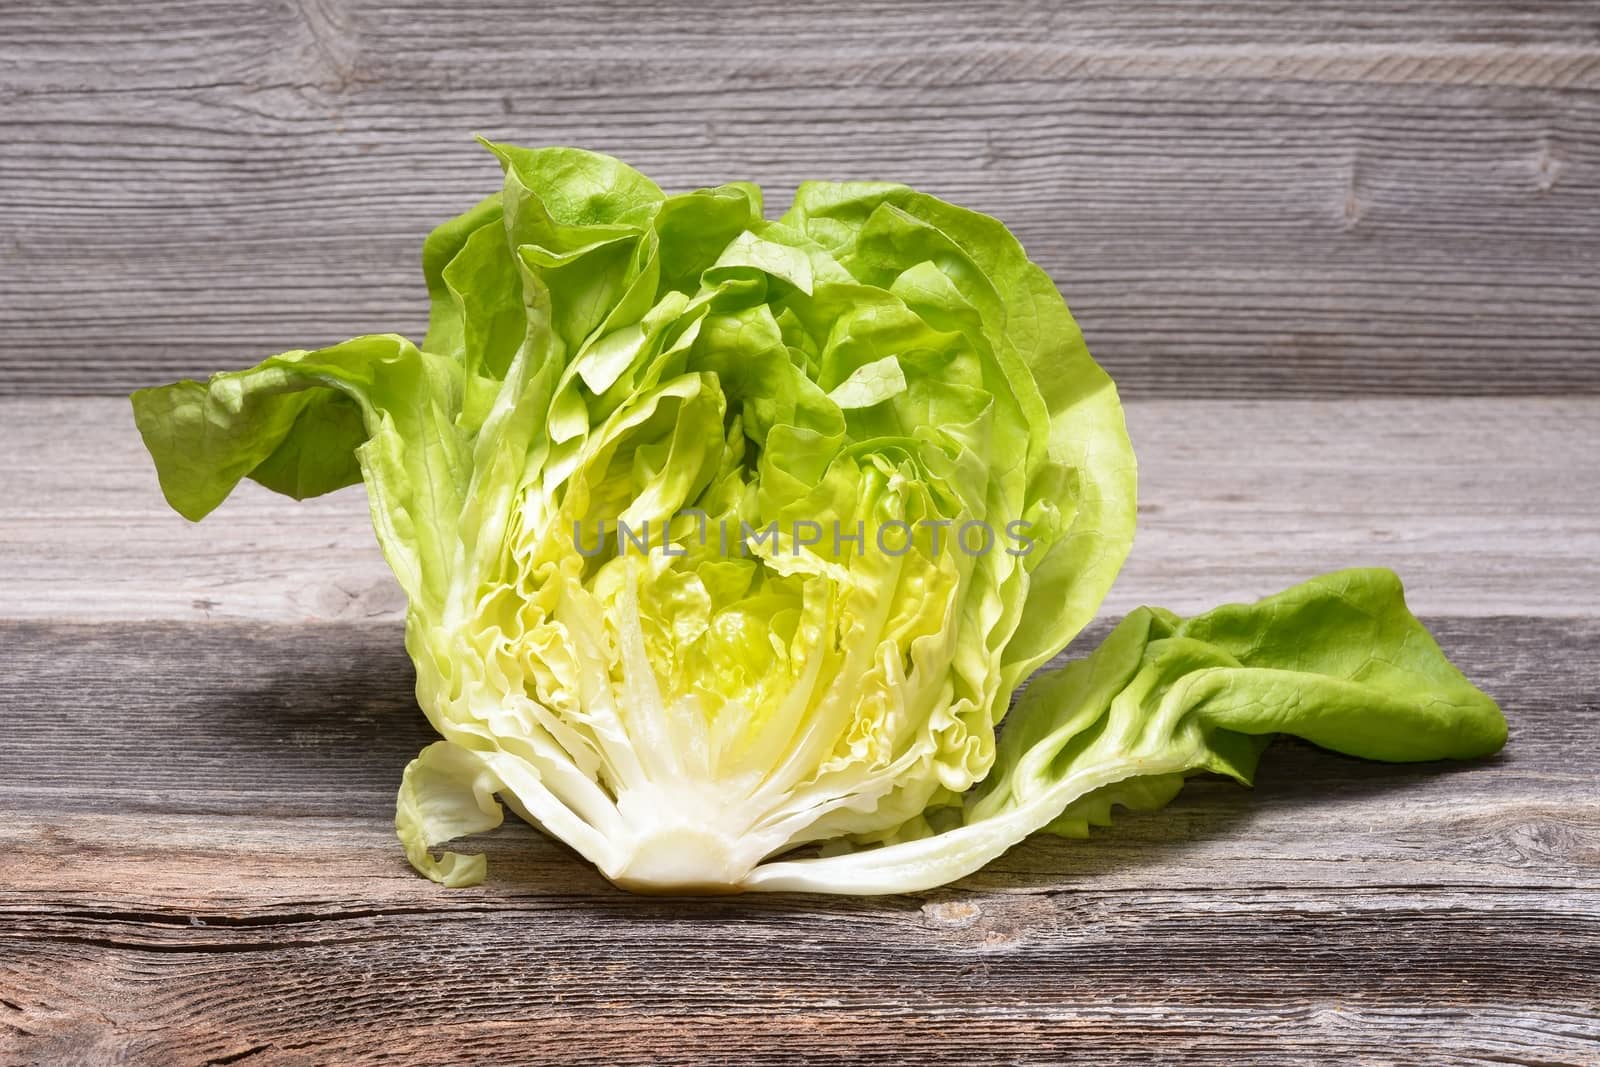 Fresh lettuce on wooden table by comet